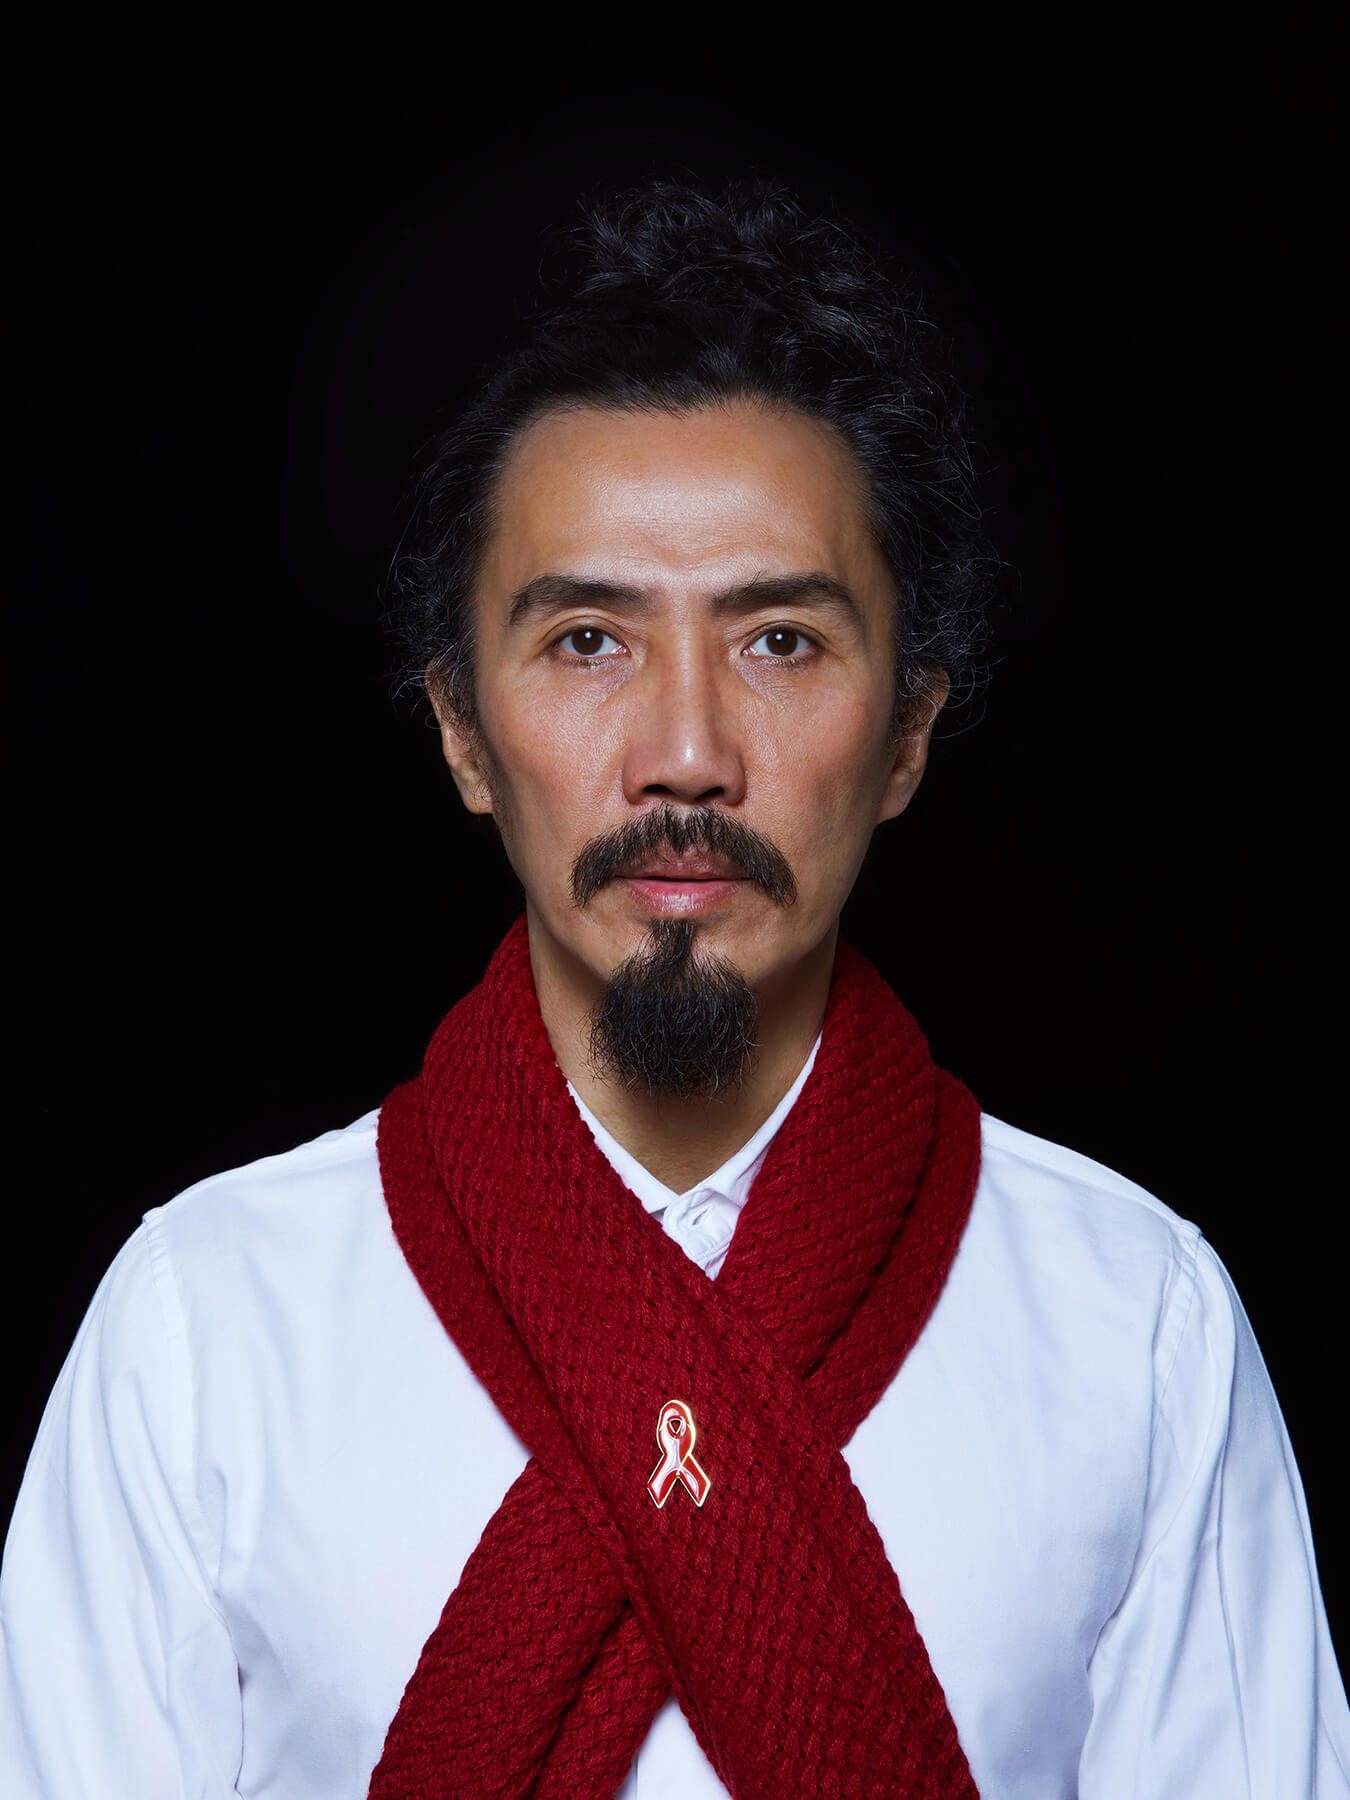 1 Dec 2017 World Aids Day Derong is wearing a red scarf with the red ribbon pinned on it